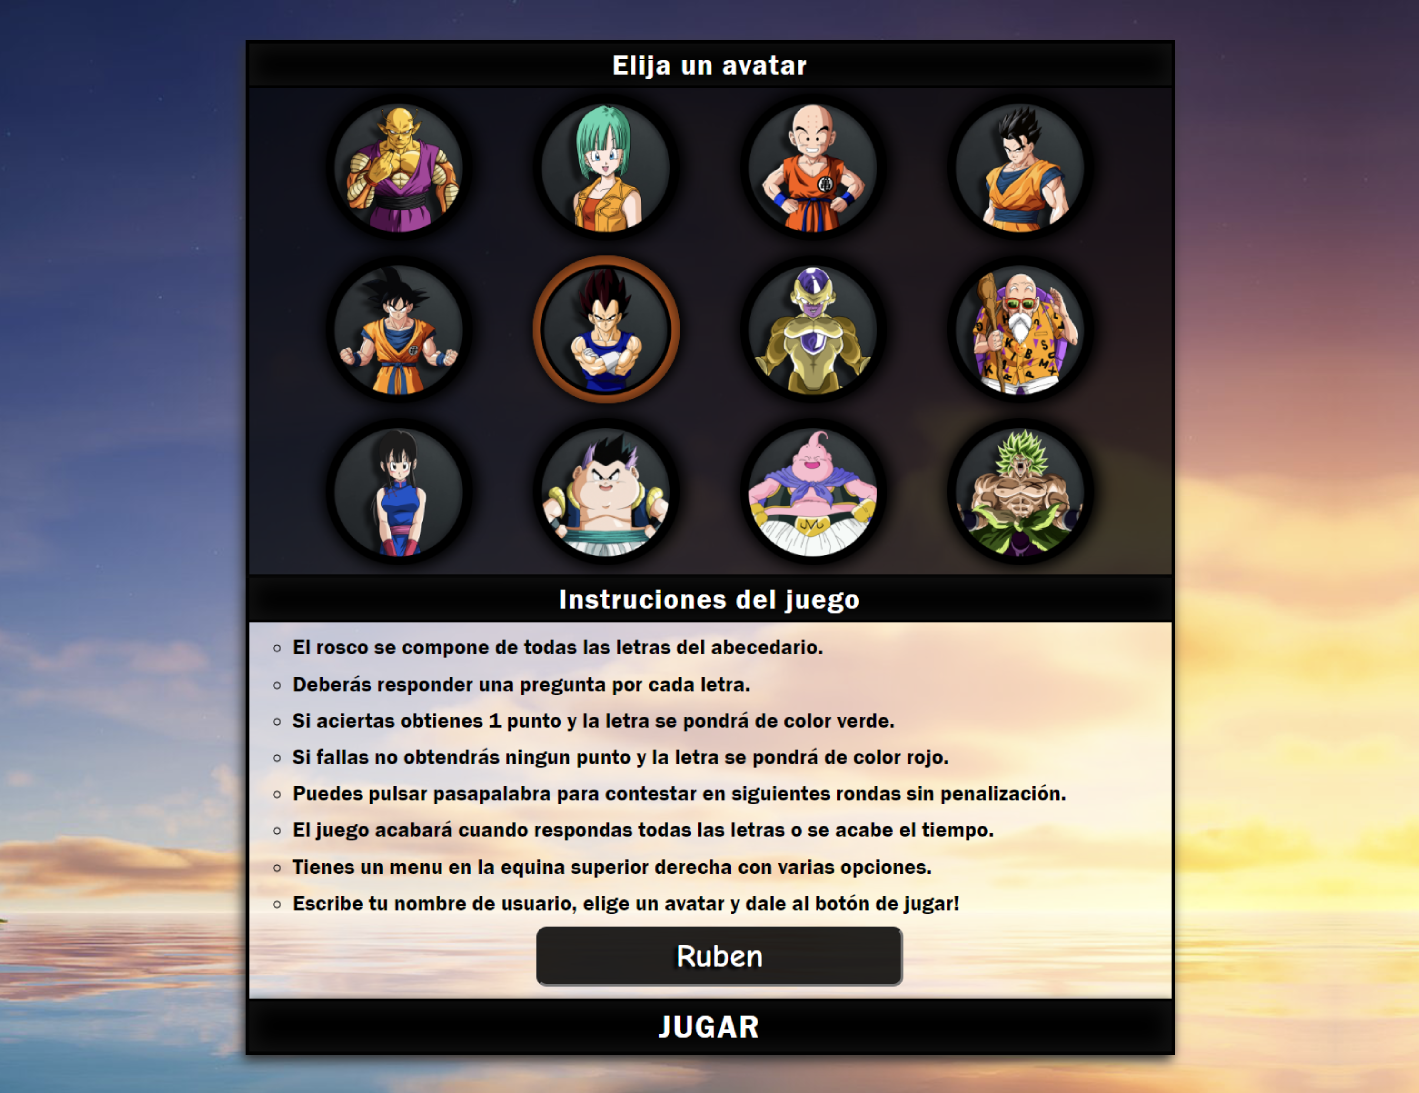 Homepage to choose from 12 avatars, game instructions, and an input to enter the username.